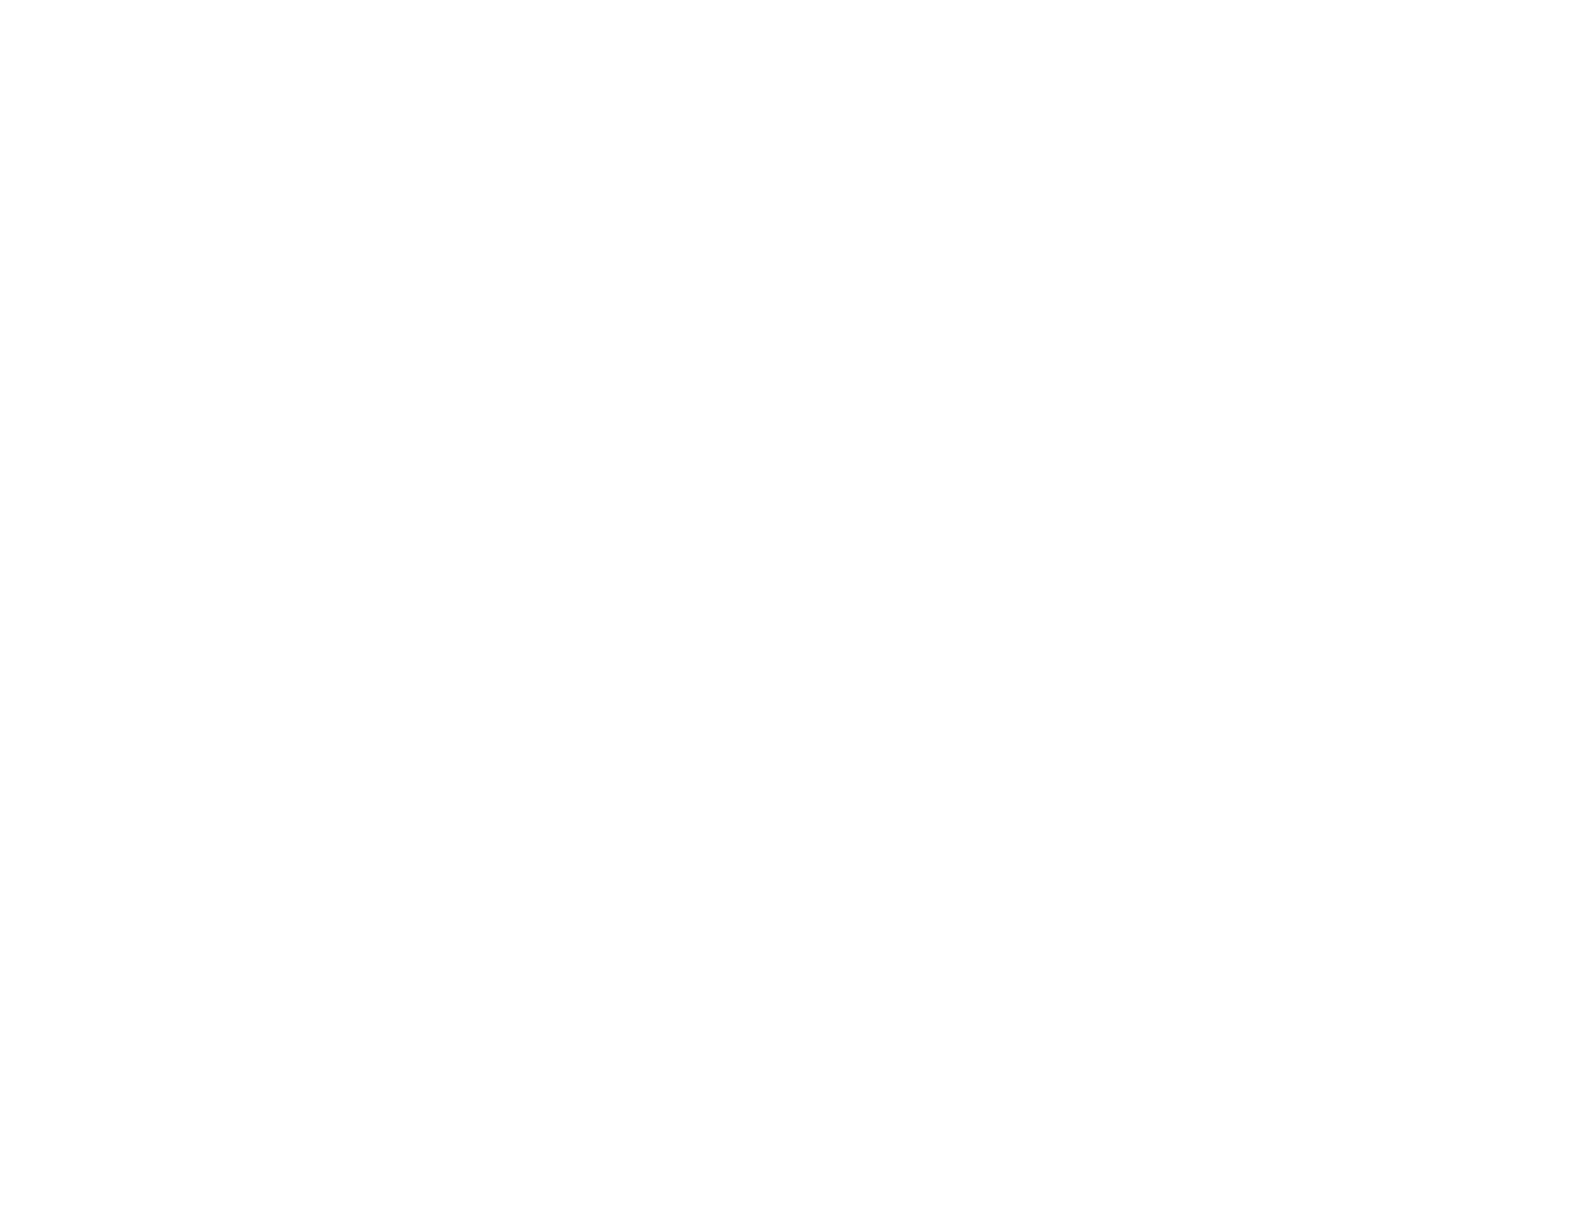 Energy Absolute logo large for dark backgrounds (transparent PNG)